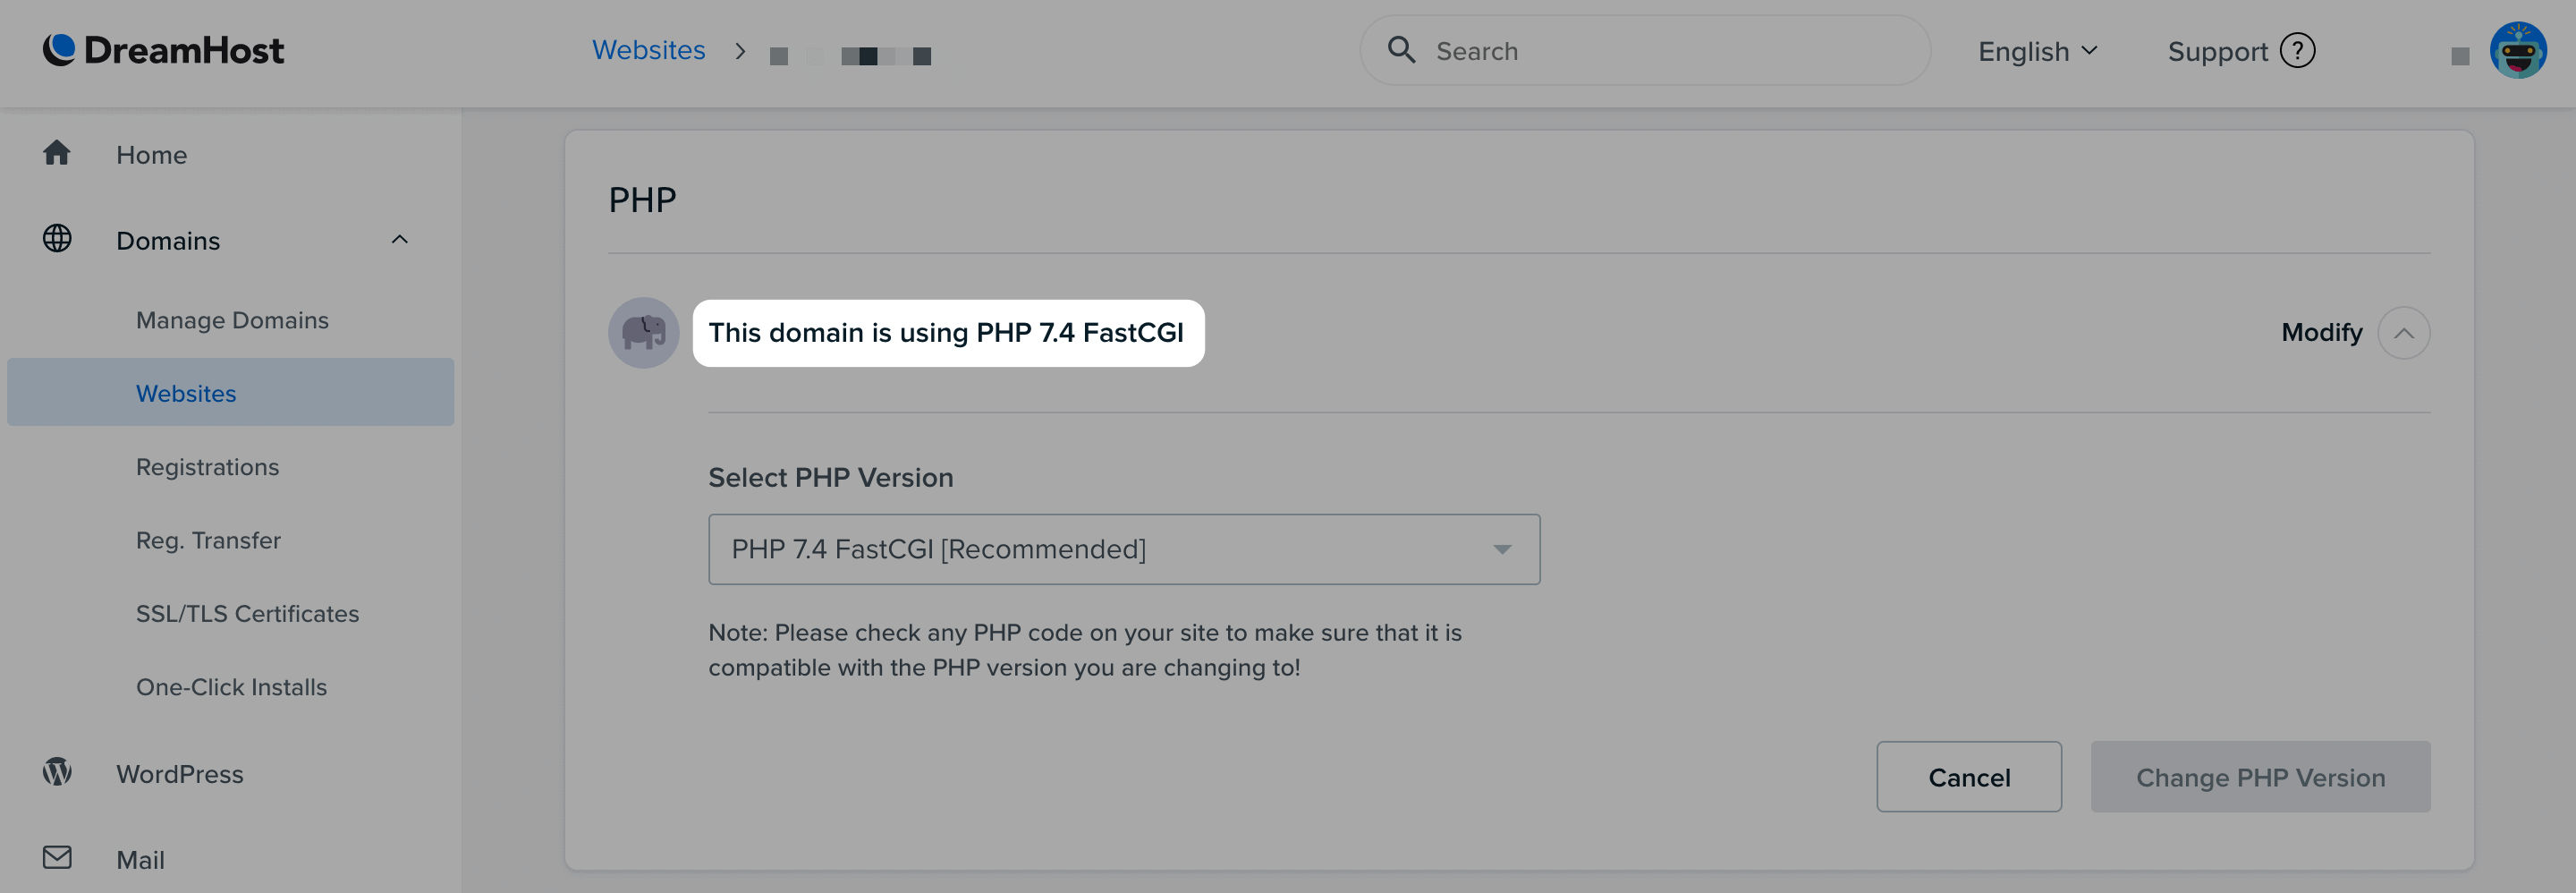 The current PHP version in DreamHost.